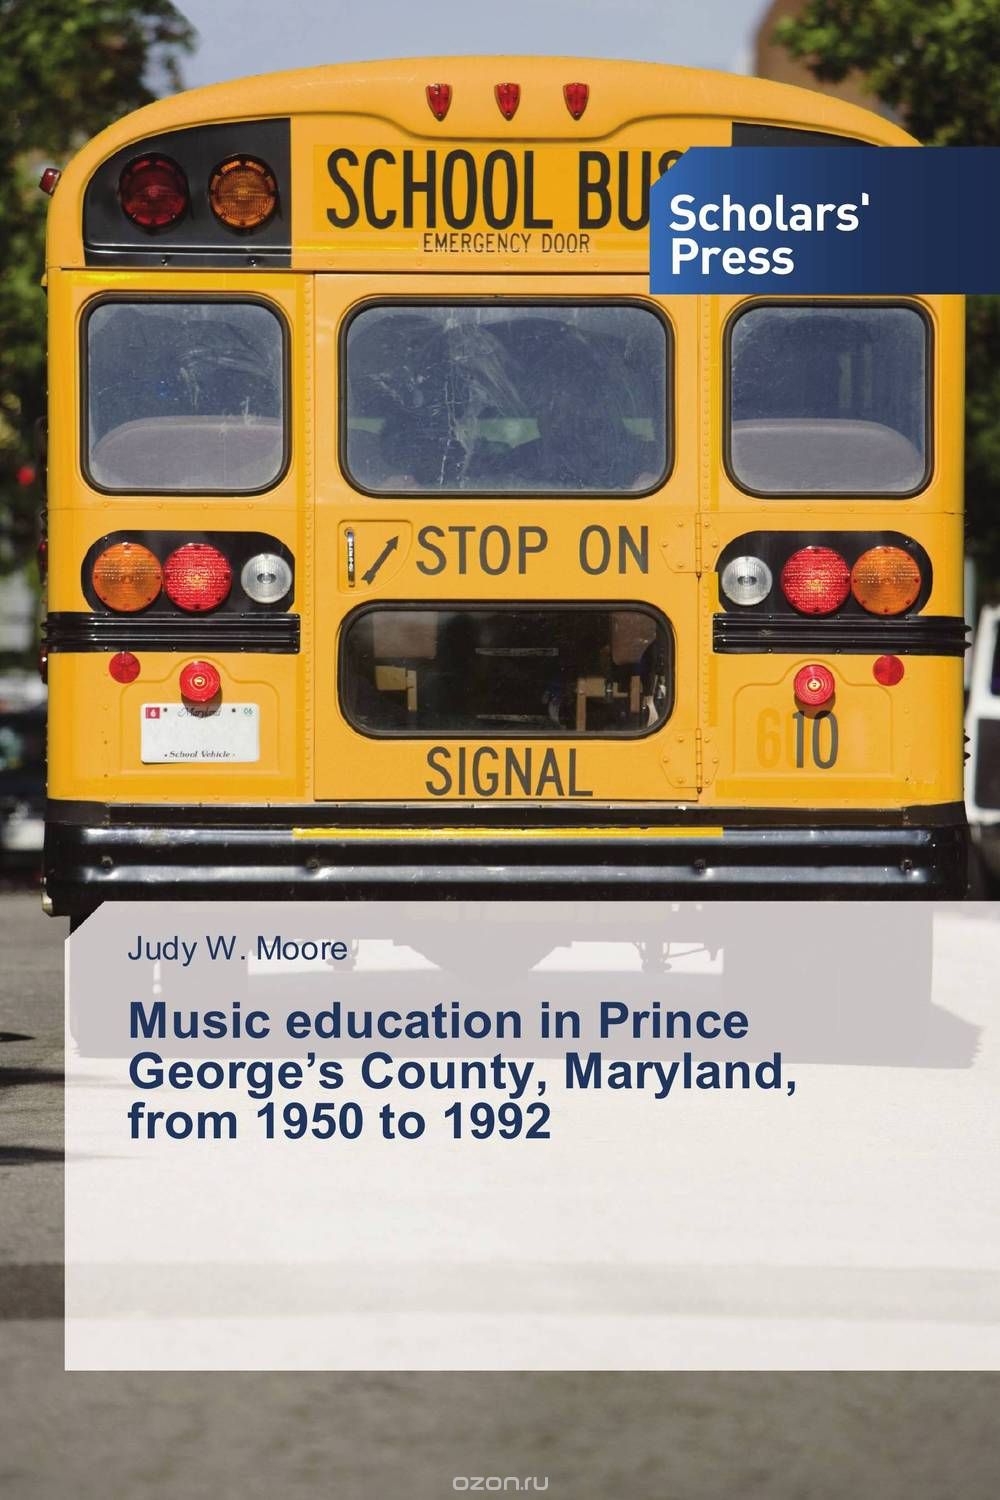 Music education in Prince George’s County, Maryland, from 1950 to 1992